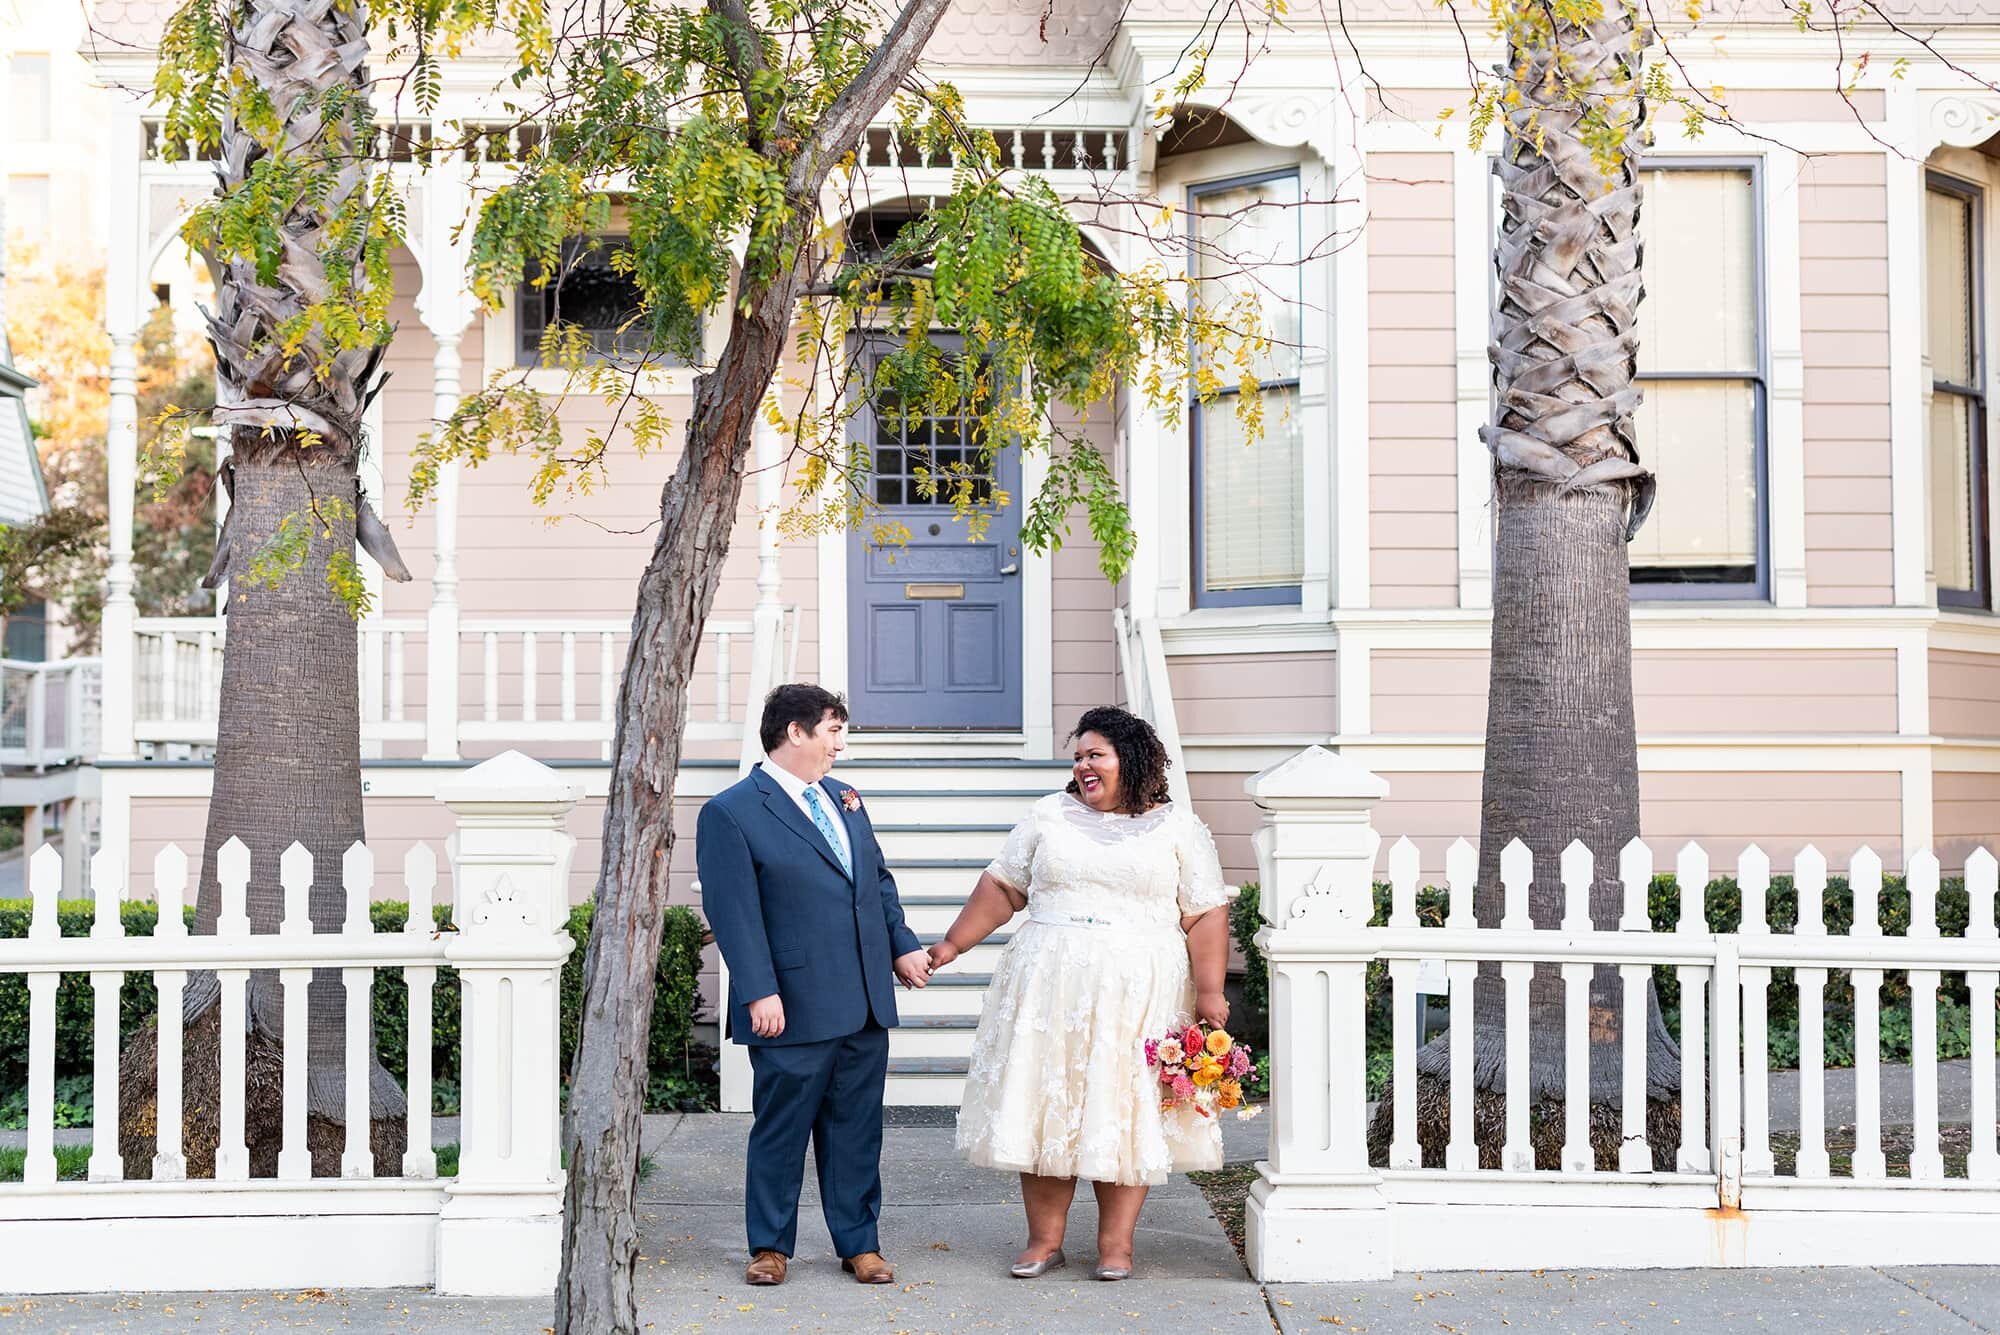 Couple standing in front of house with white picket fence